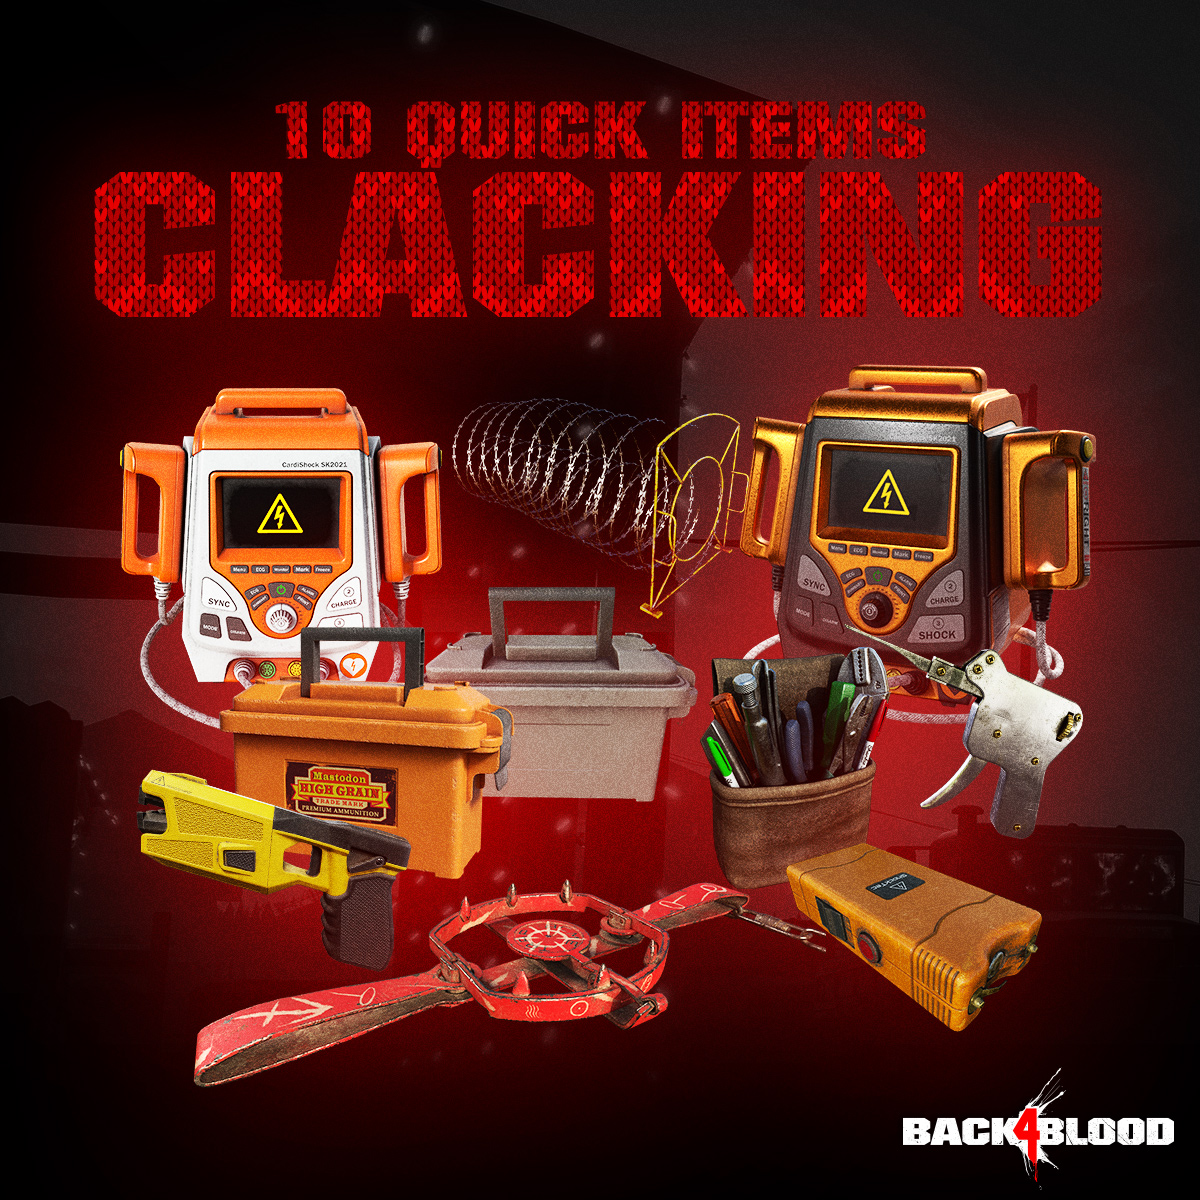 On the tenth day of Riddenmas, Phillips gave to me: ten quick items clacking.